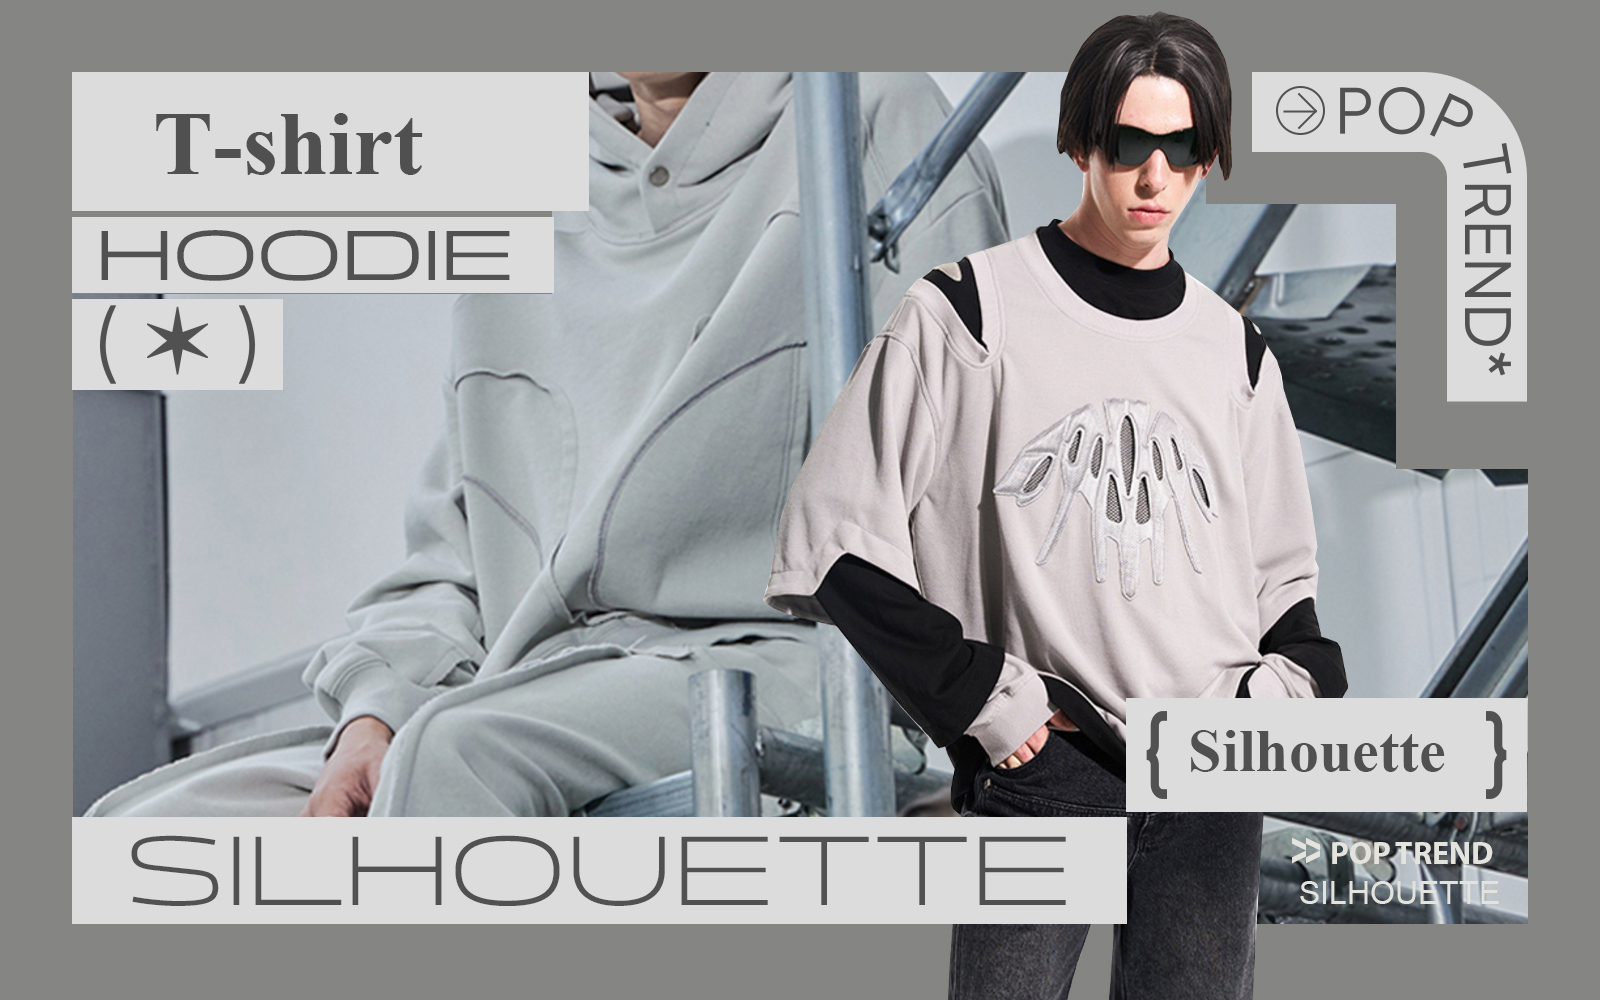 Deconstructed Aesthetic -- The Silhouette Trend for Men's T-shirt & Sweatshirt